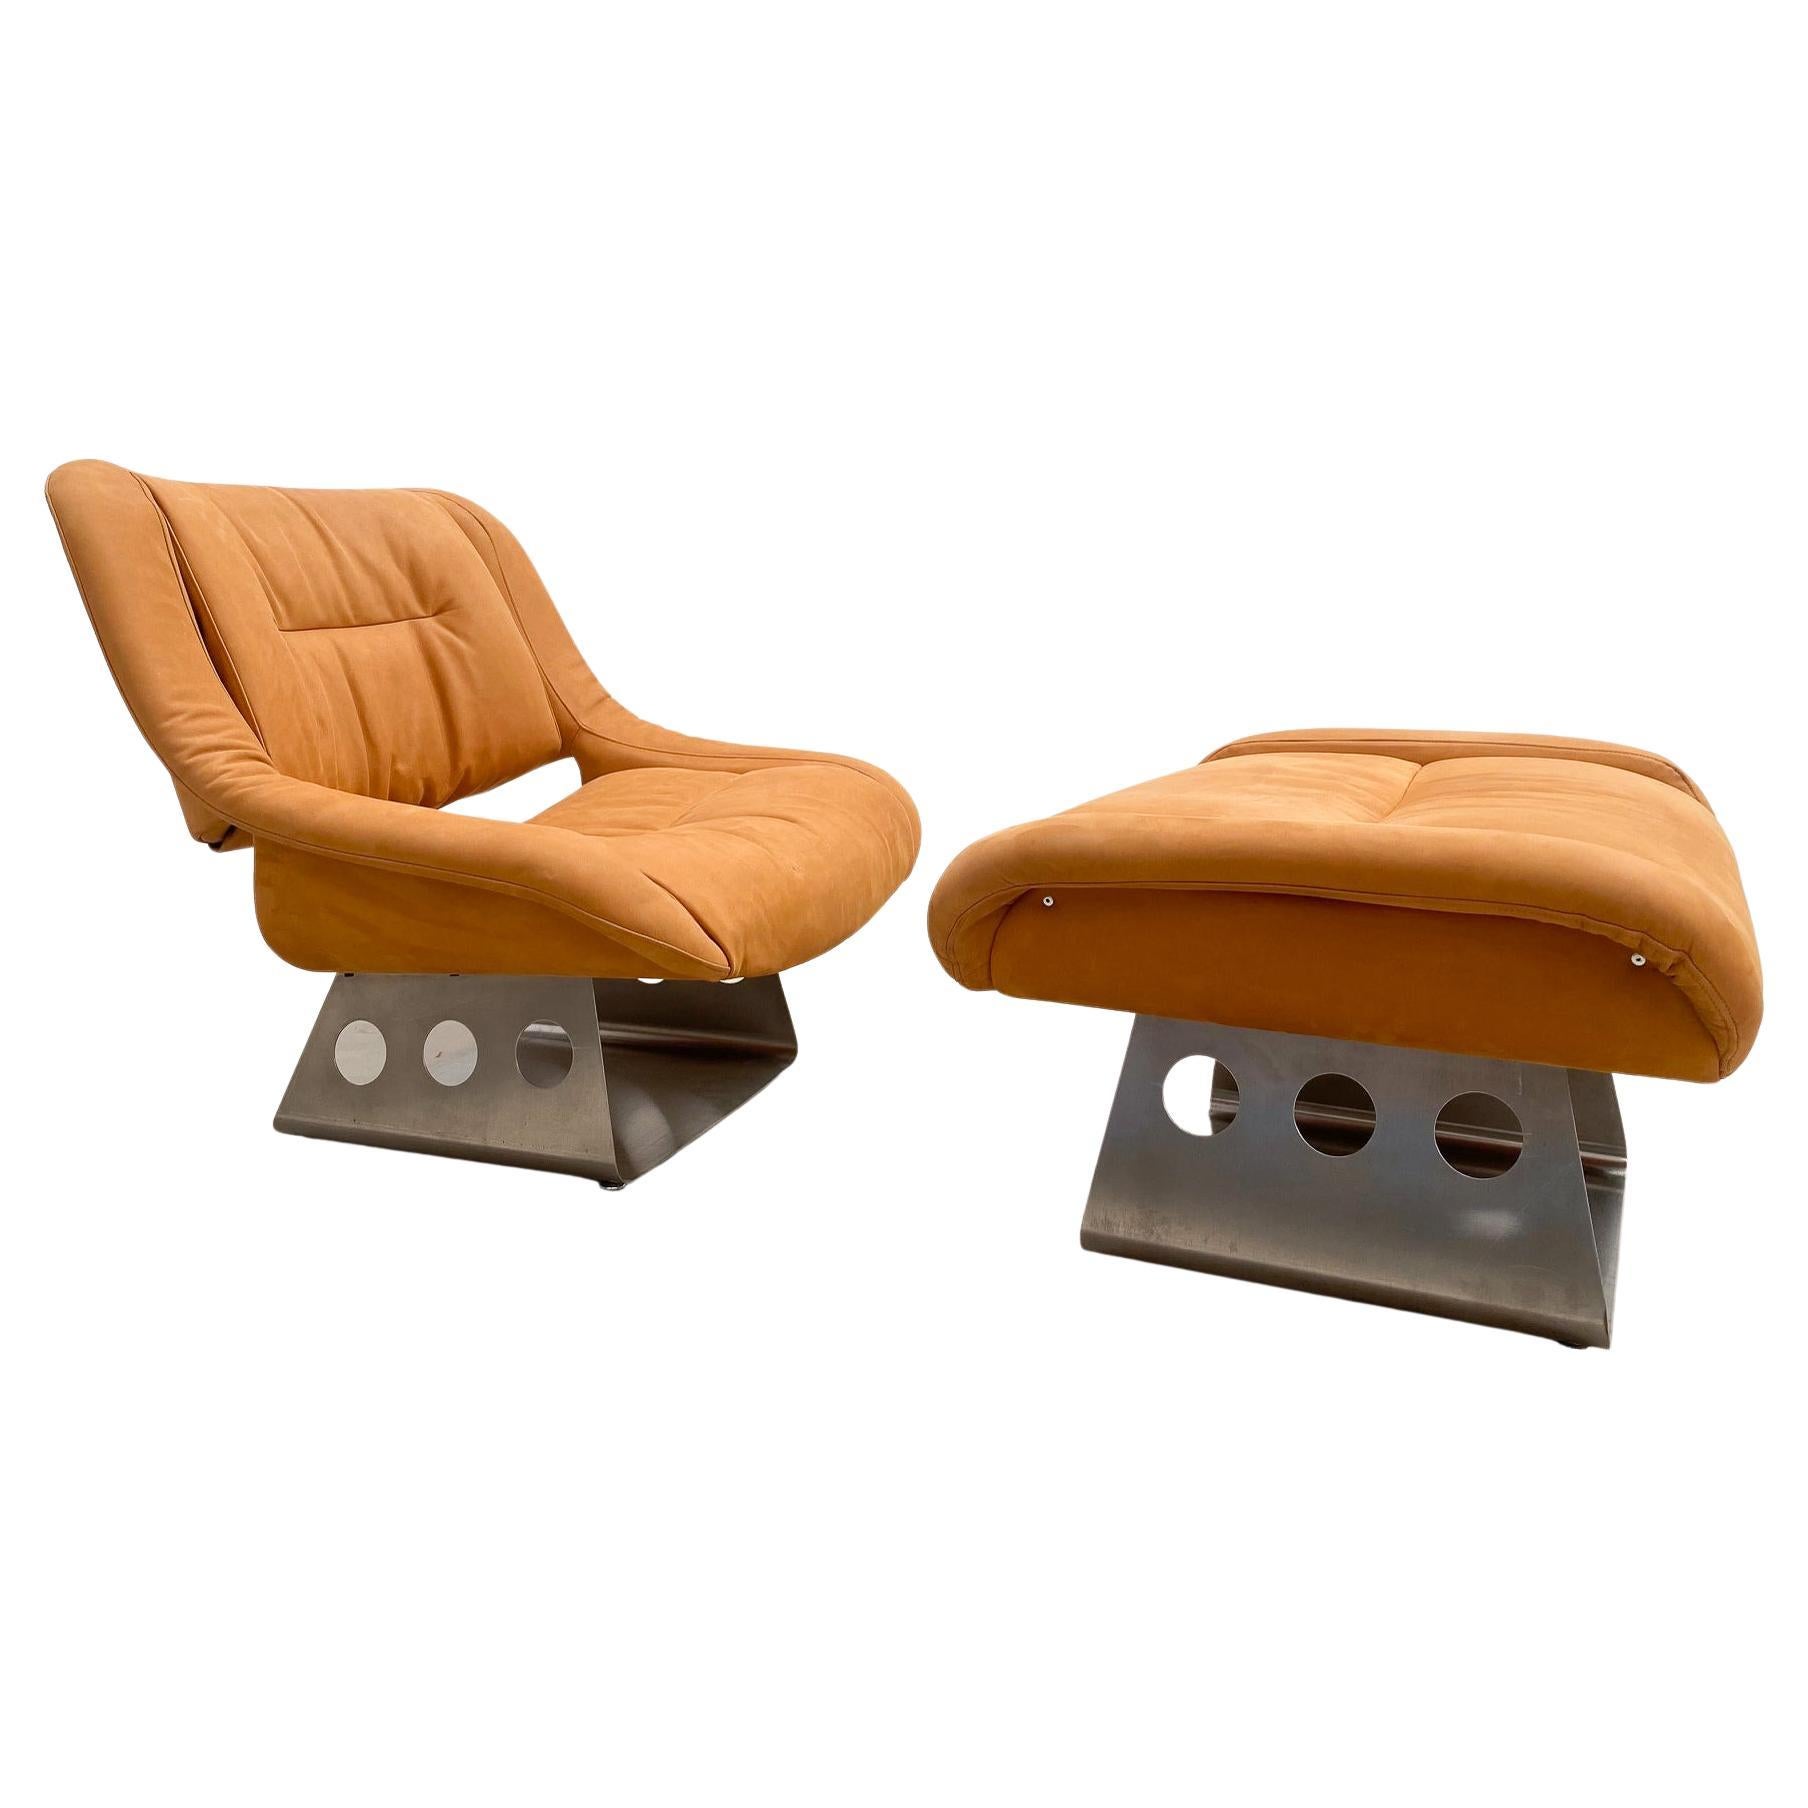 Mid-Century Lounge Chair and Ottoman, Italy, 1970s - New Leather Upholstery